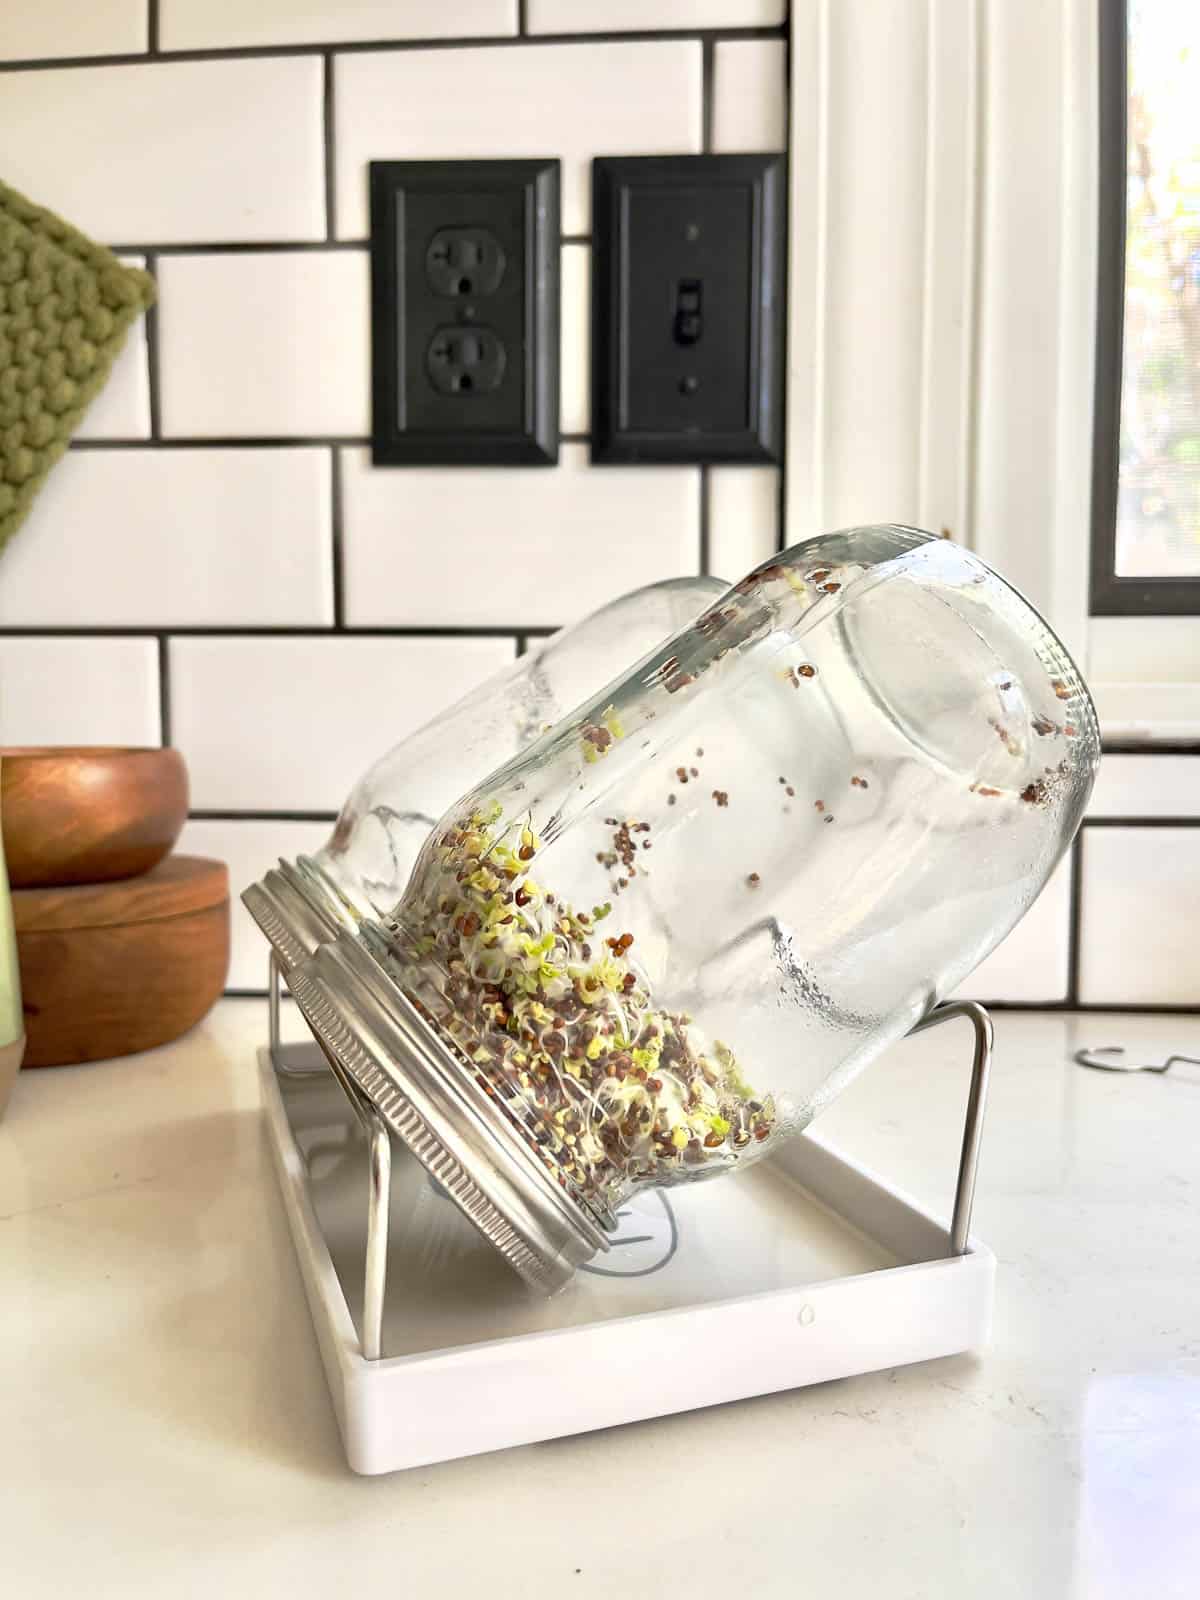 Sprouting jars on a draining rack growing broccoli sprouts